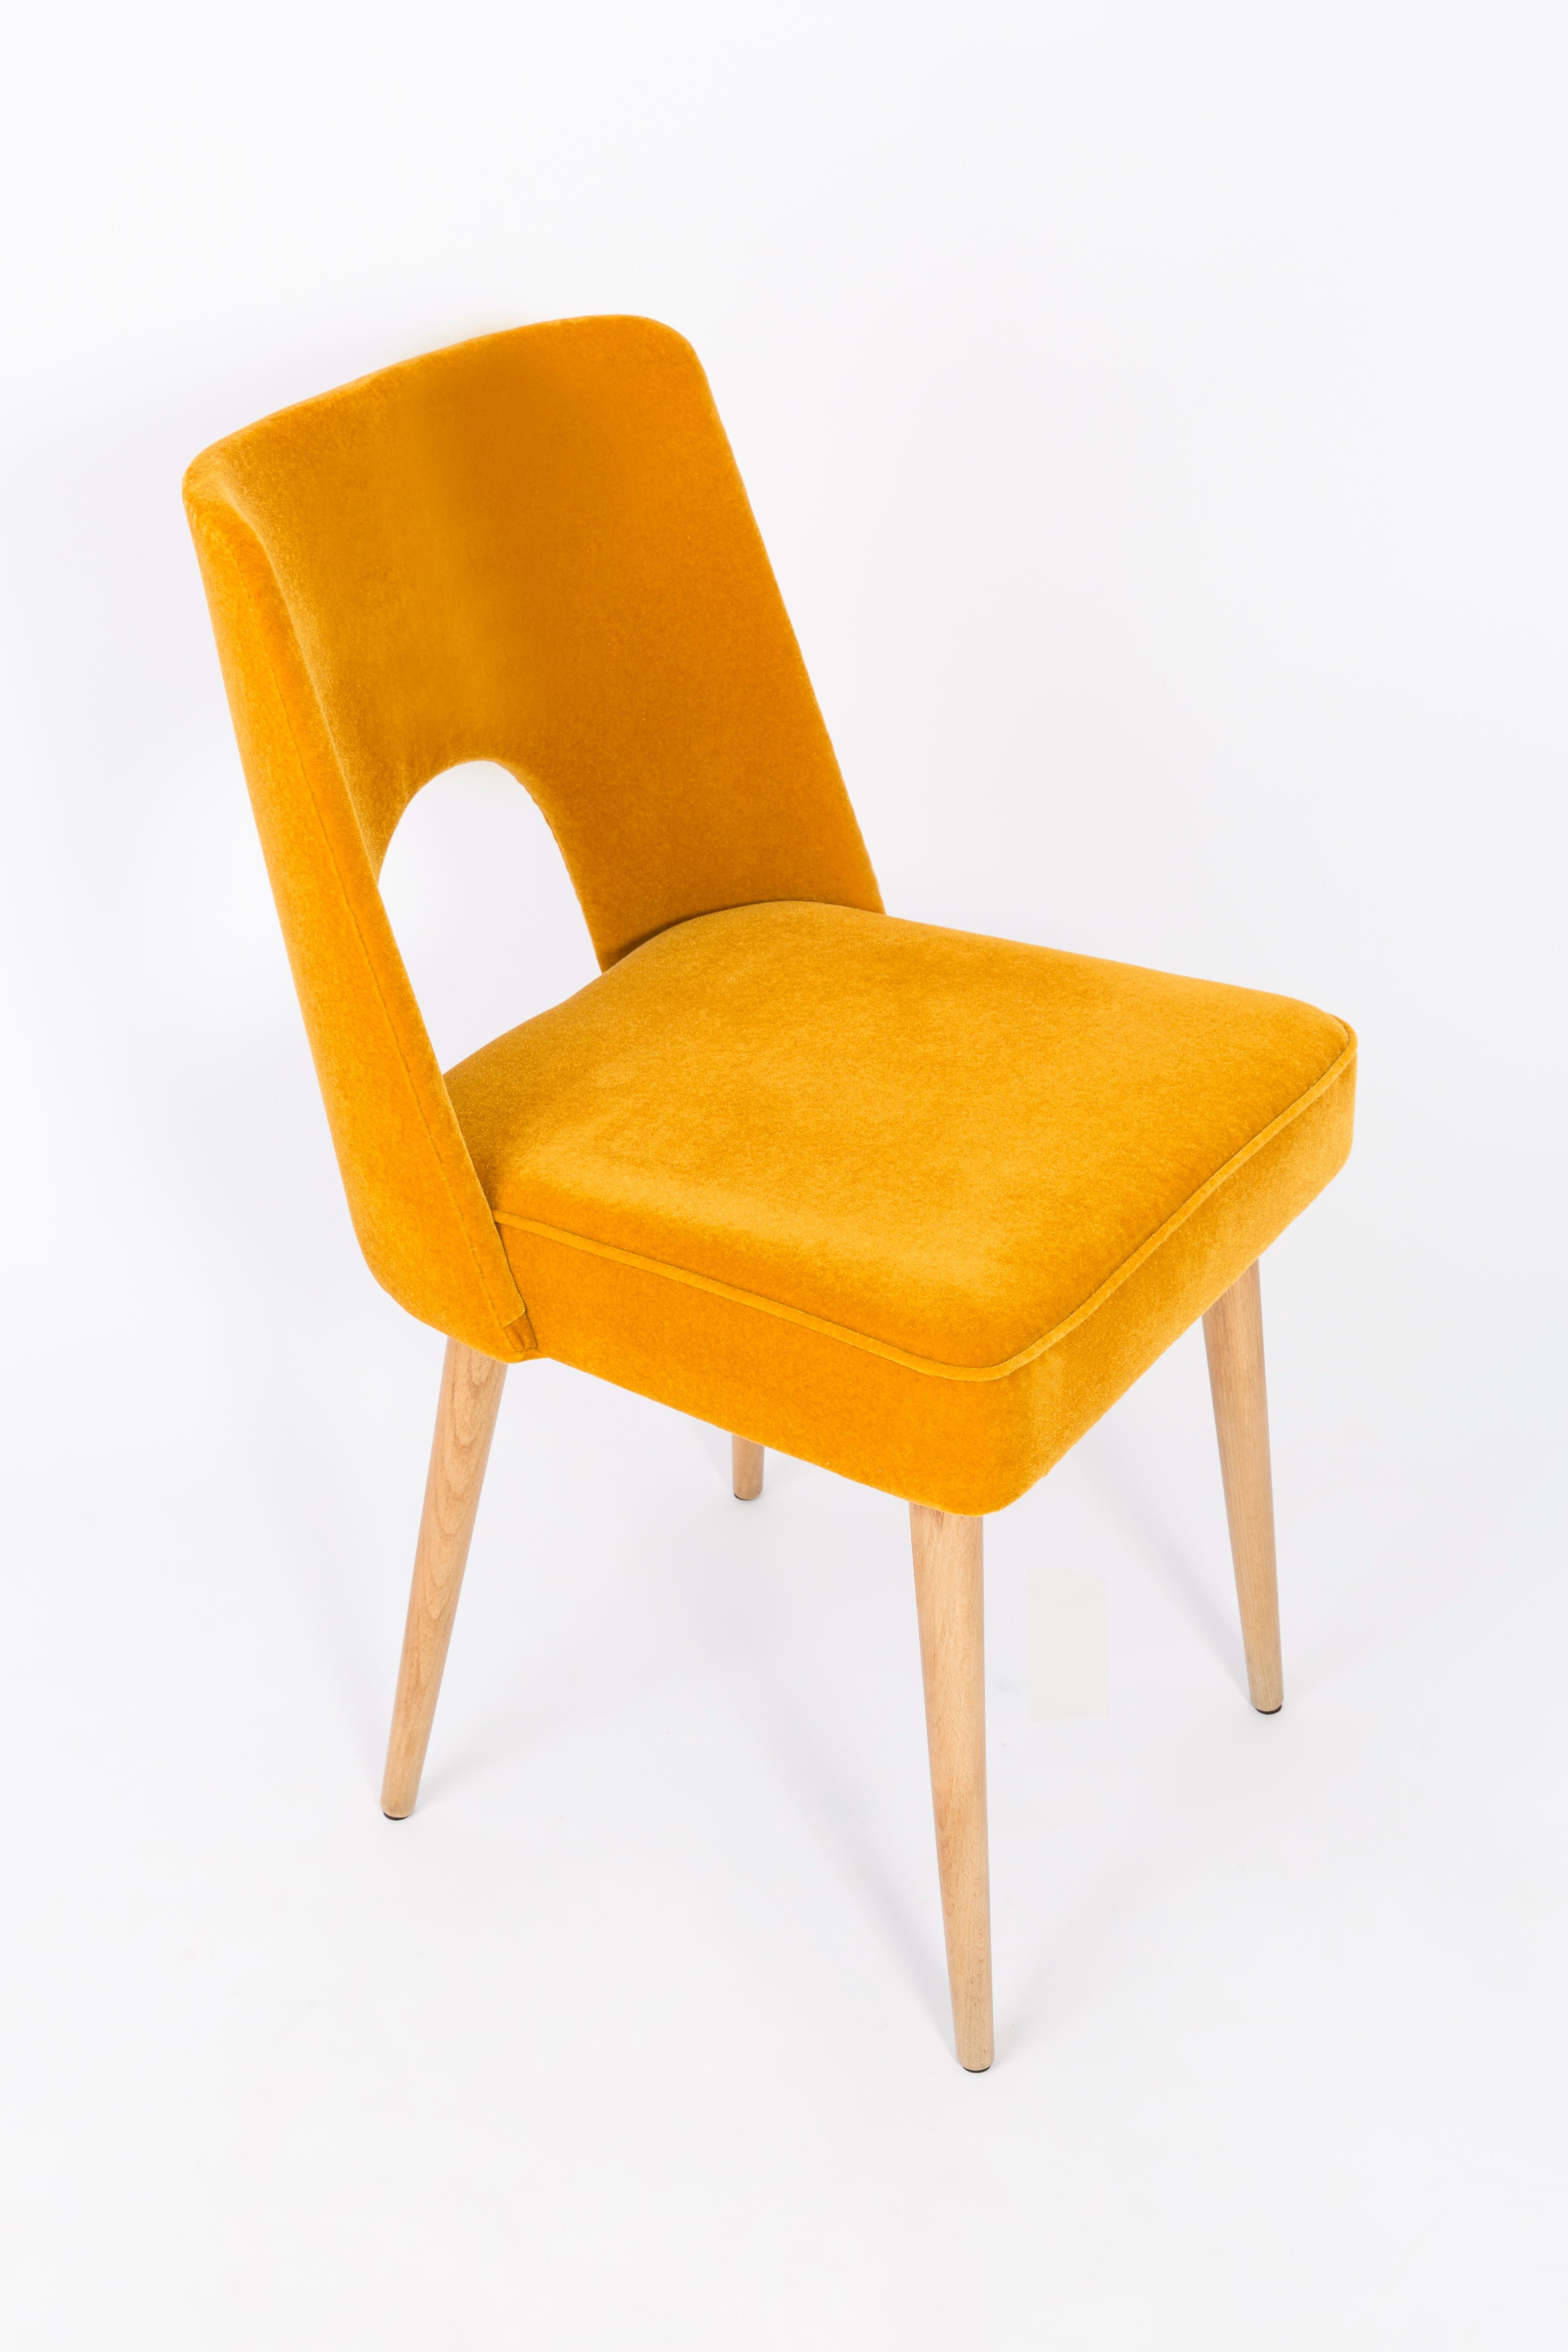 Set of Four Mustard Yellow Velvet 'Shell' Chairs, 1960s For Sale 2